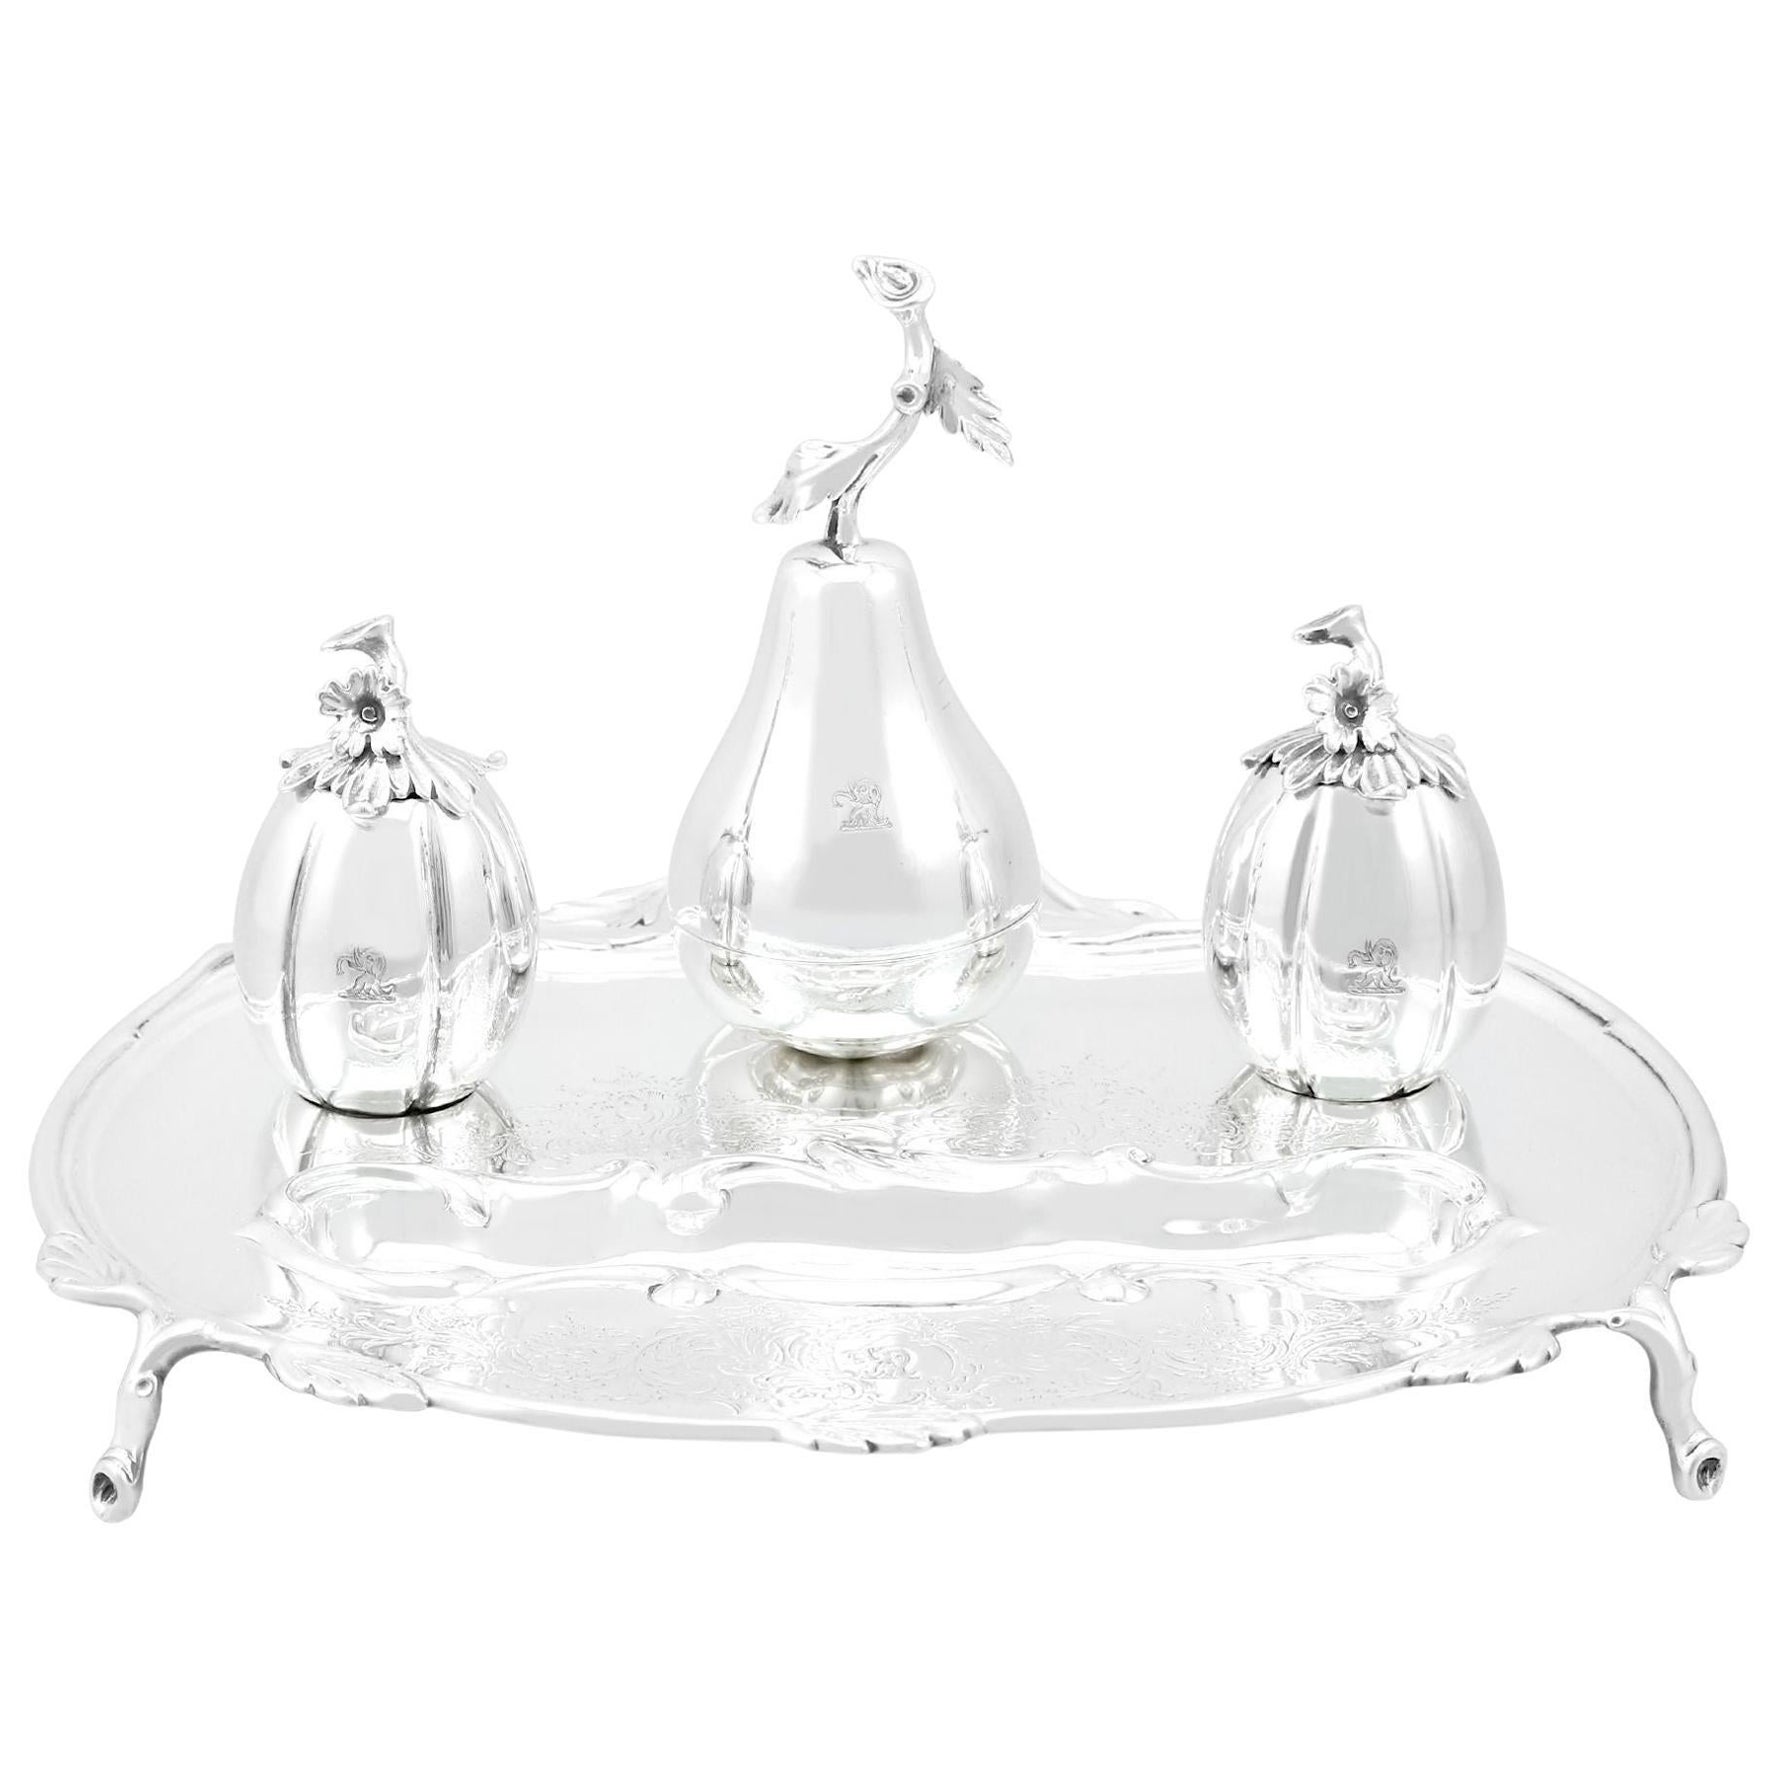 Antique Victorian Sterling Silver Inkstand For Sale